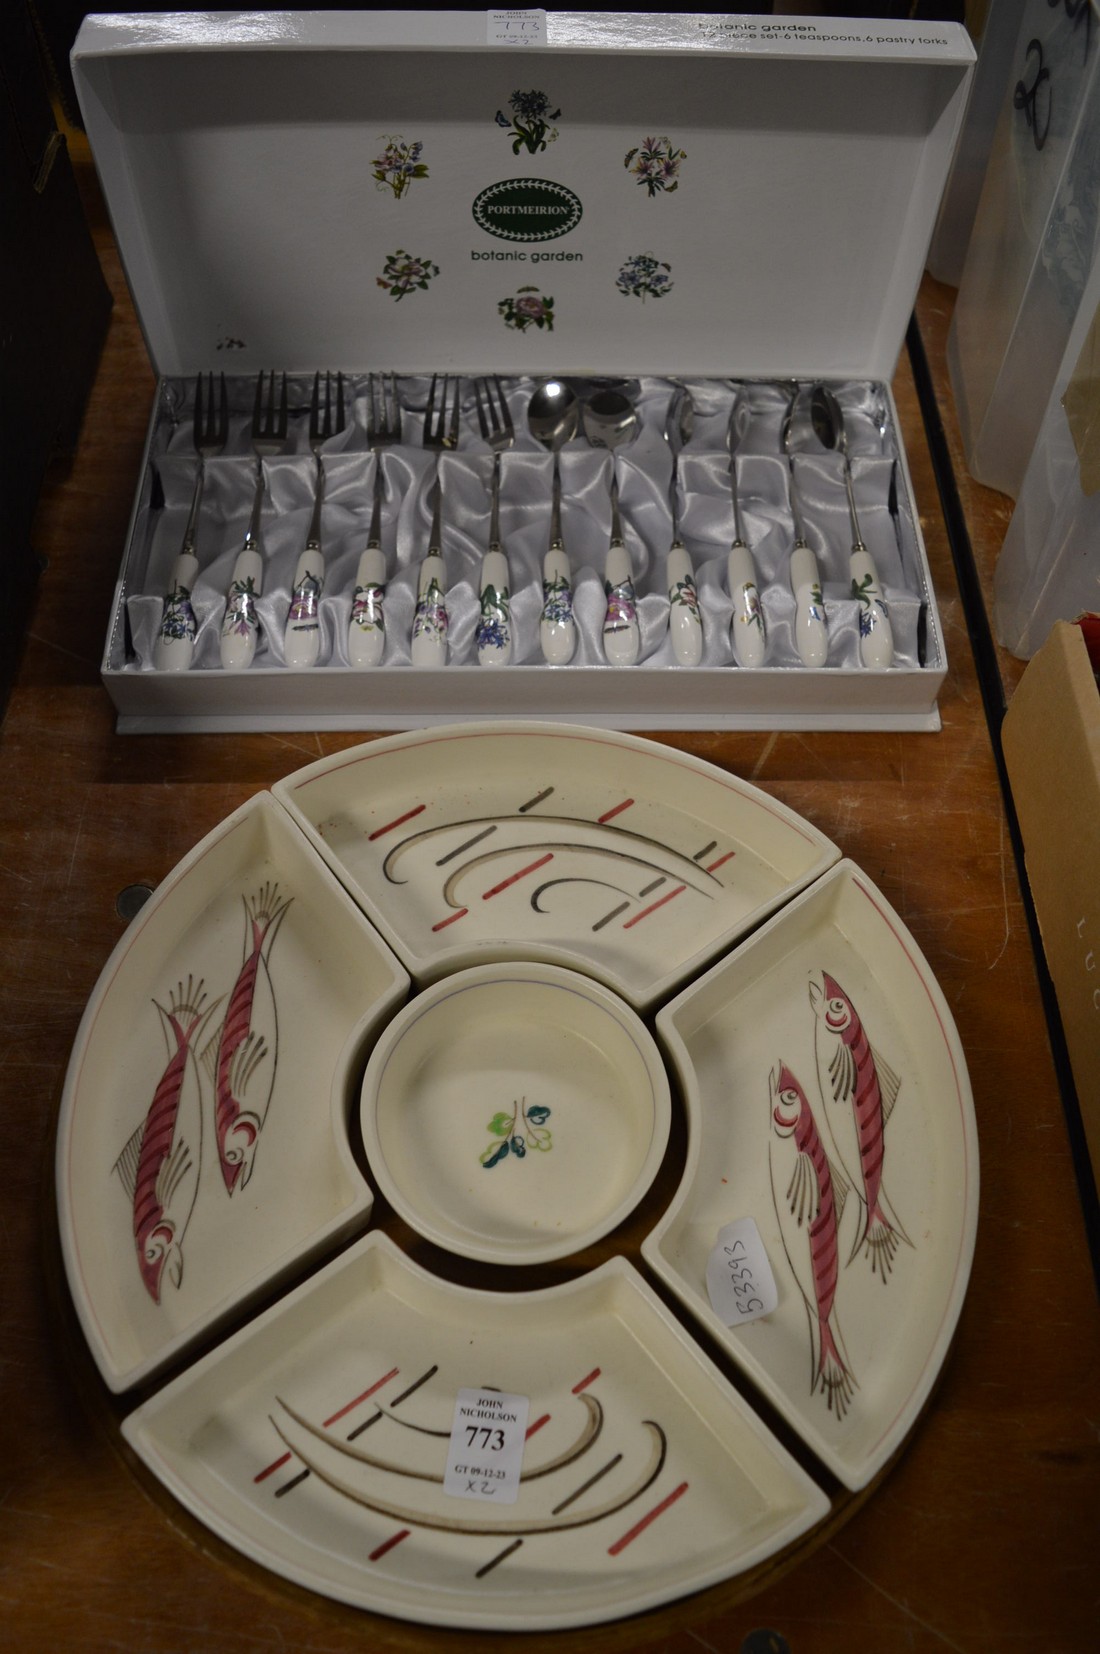 A Poole pottery fish decorated o'dourves set together with a Portmeirion Botanic Garden box set of